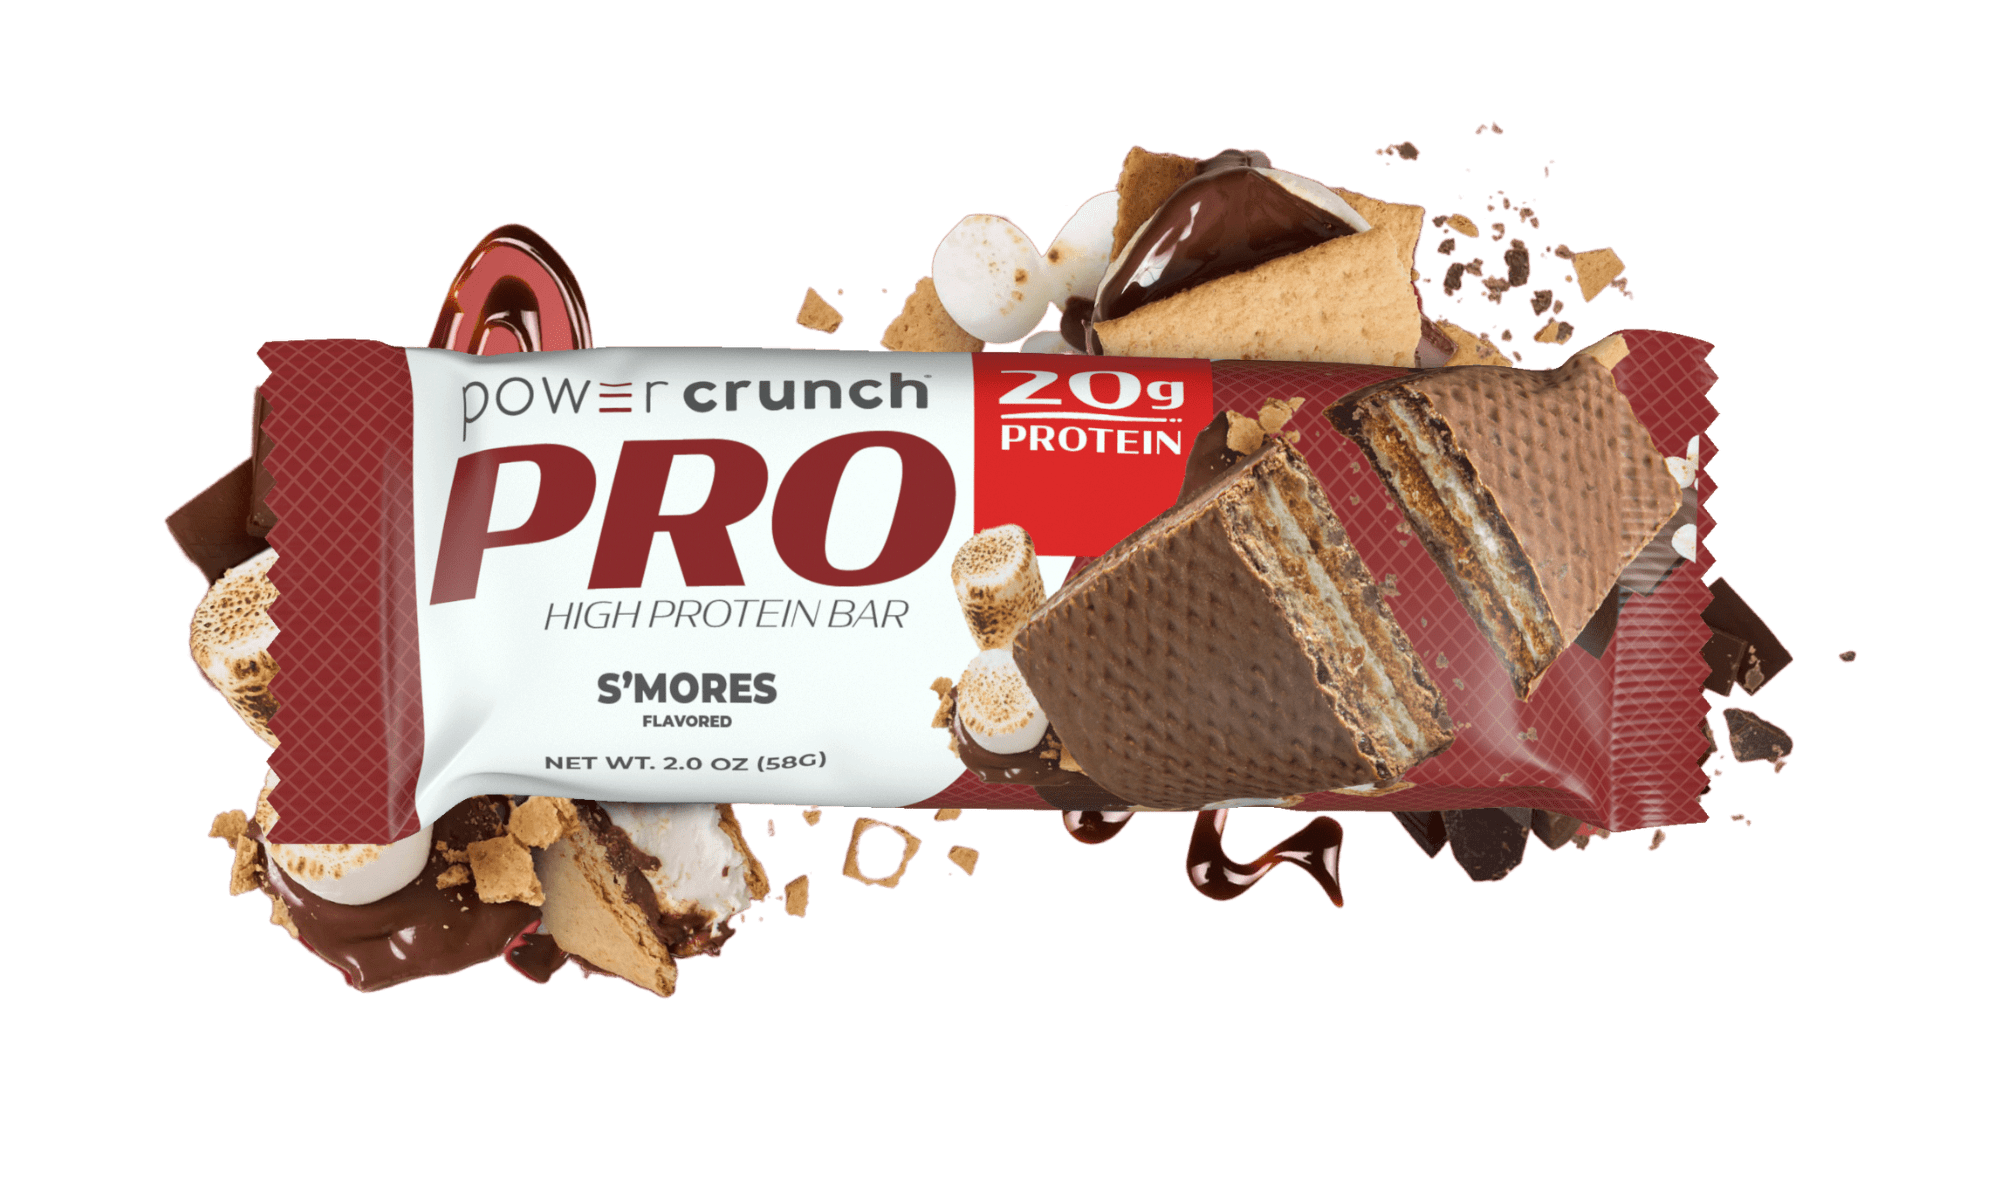 Power Crunch PRO S'mores 20g protein bars pictured with S'mores flavor explosion